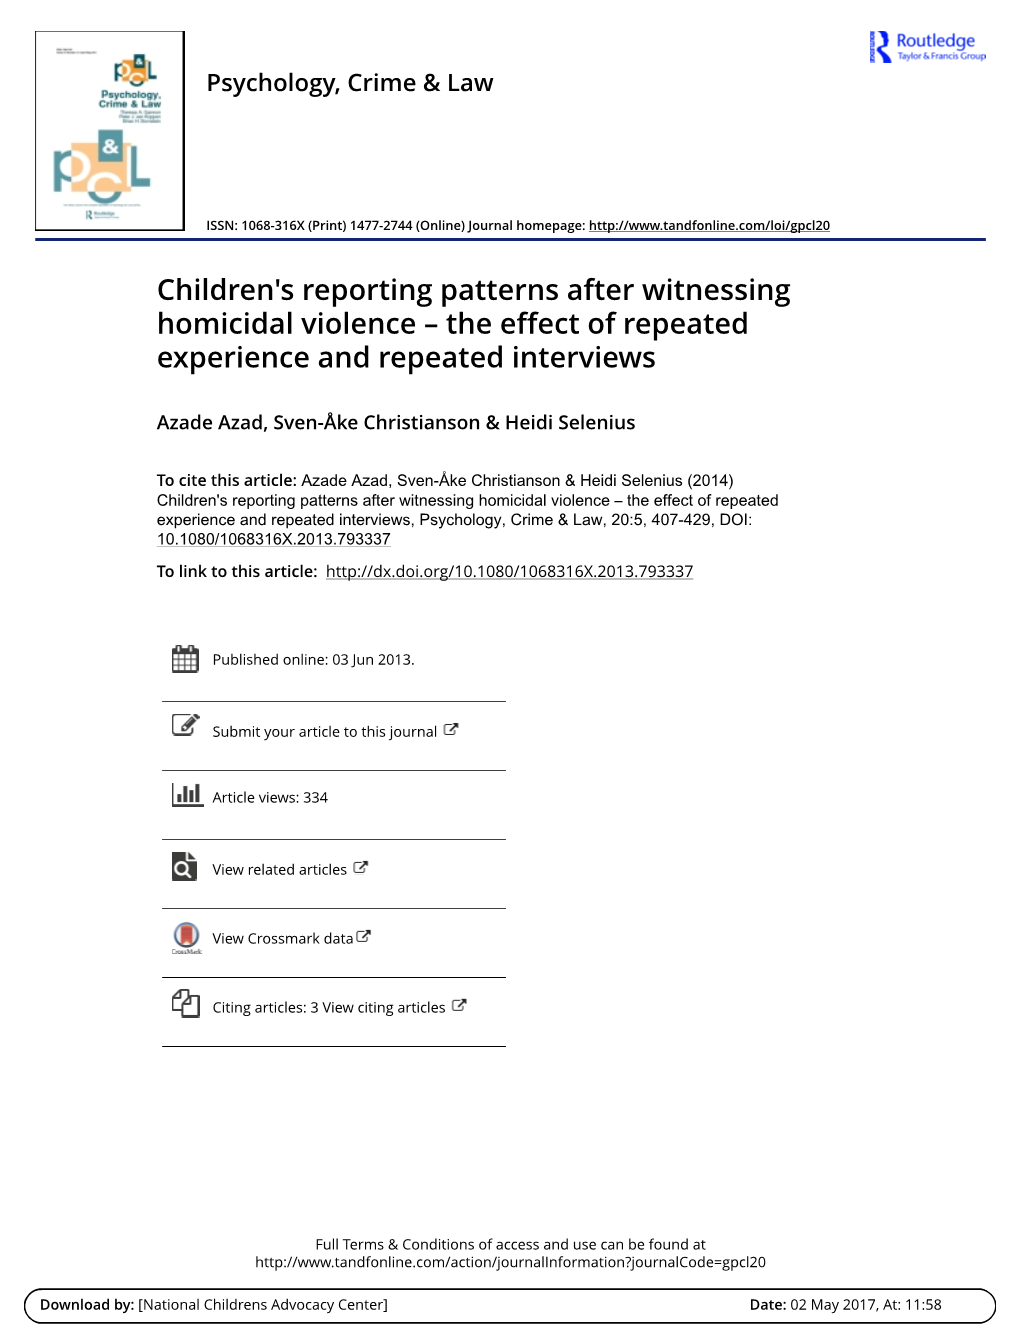 Children's Reporting Patterns After Witnessing Homicidal Violence – the Effect of Repeated Experience and Repeated Interviews